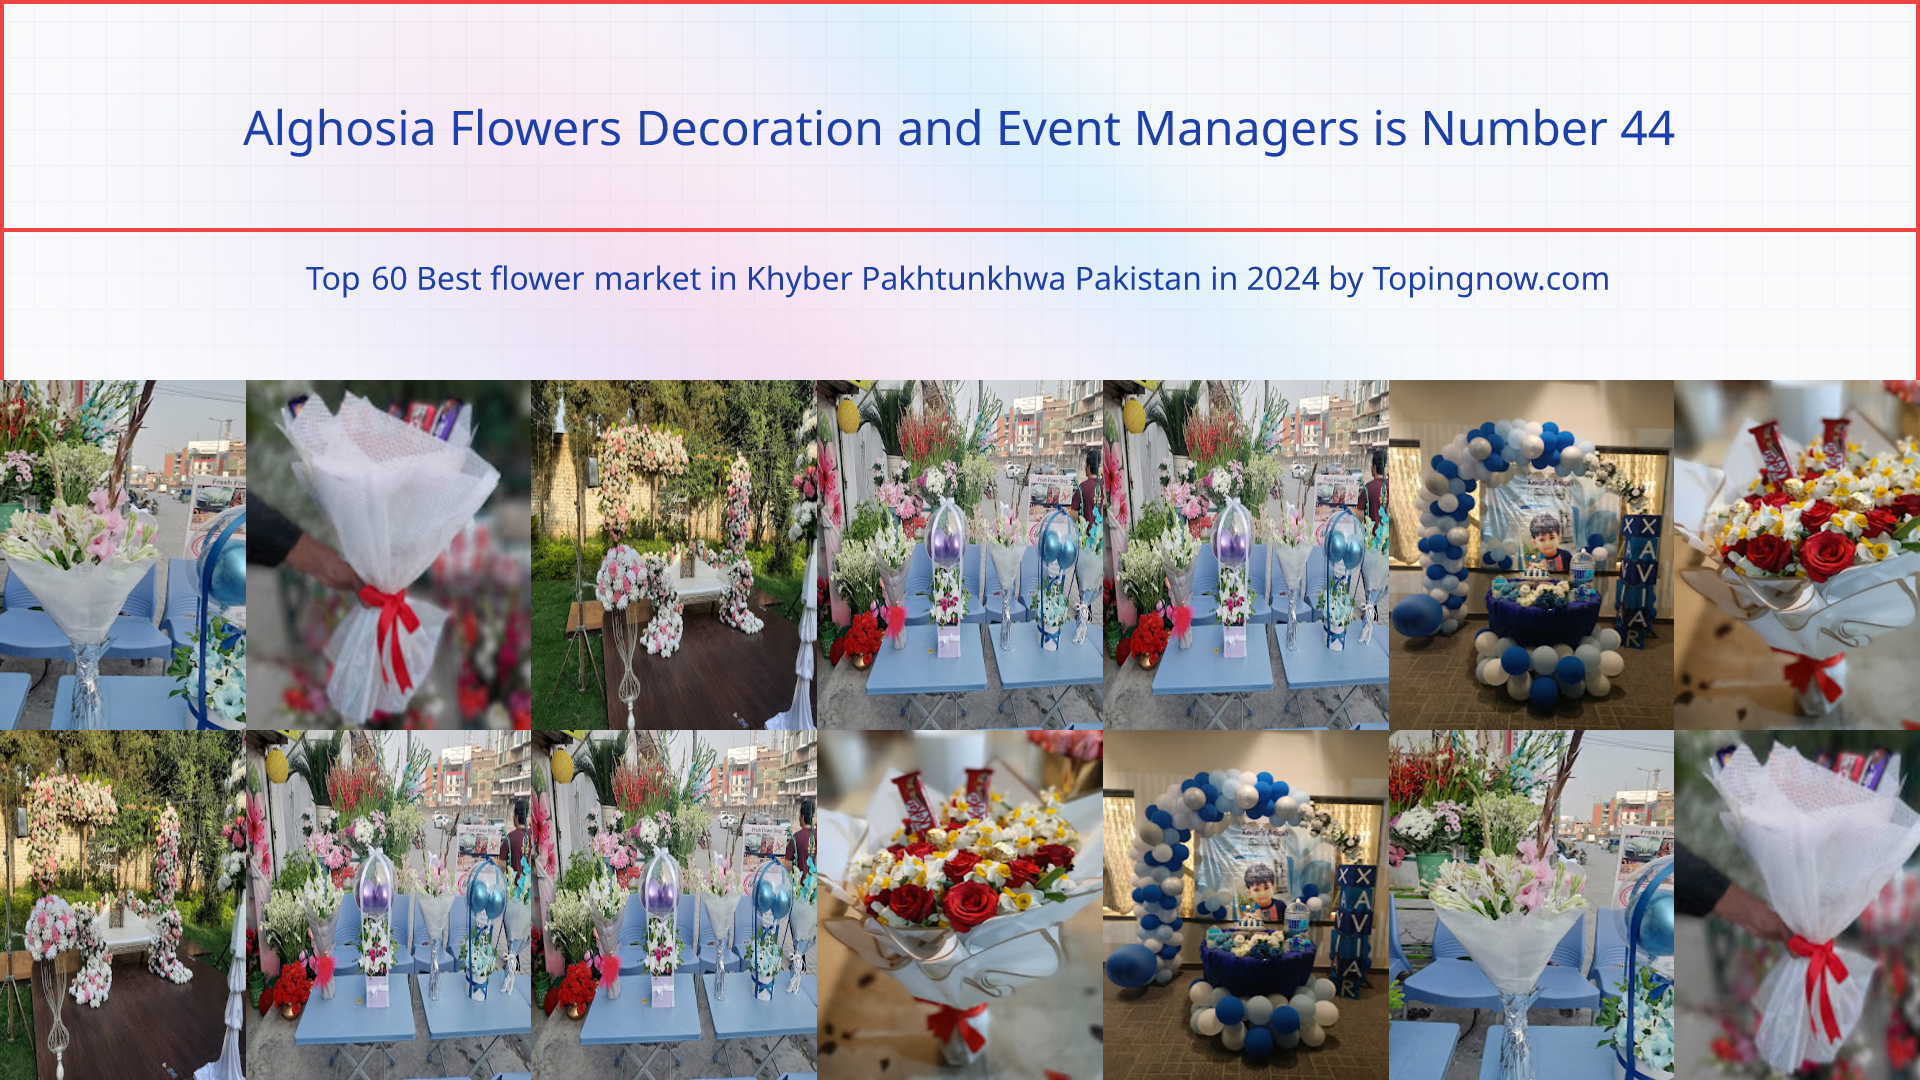 Alghosia Flowers Decoration and Event Managers: Top 60 Best flower market in Khyber Pakhtunkhwa Pakistan in 2024